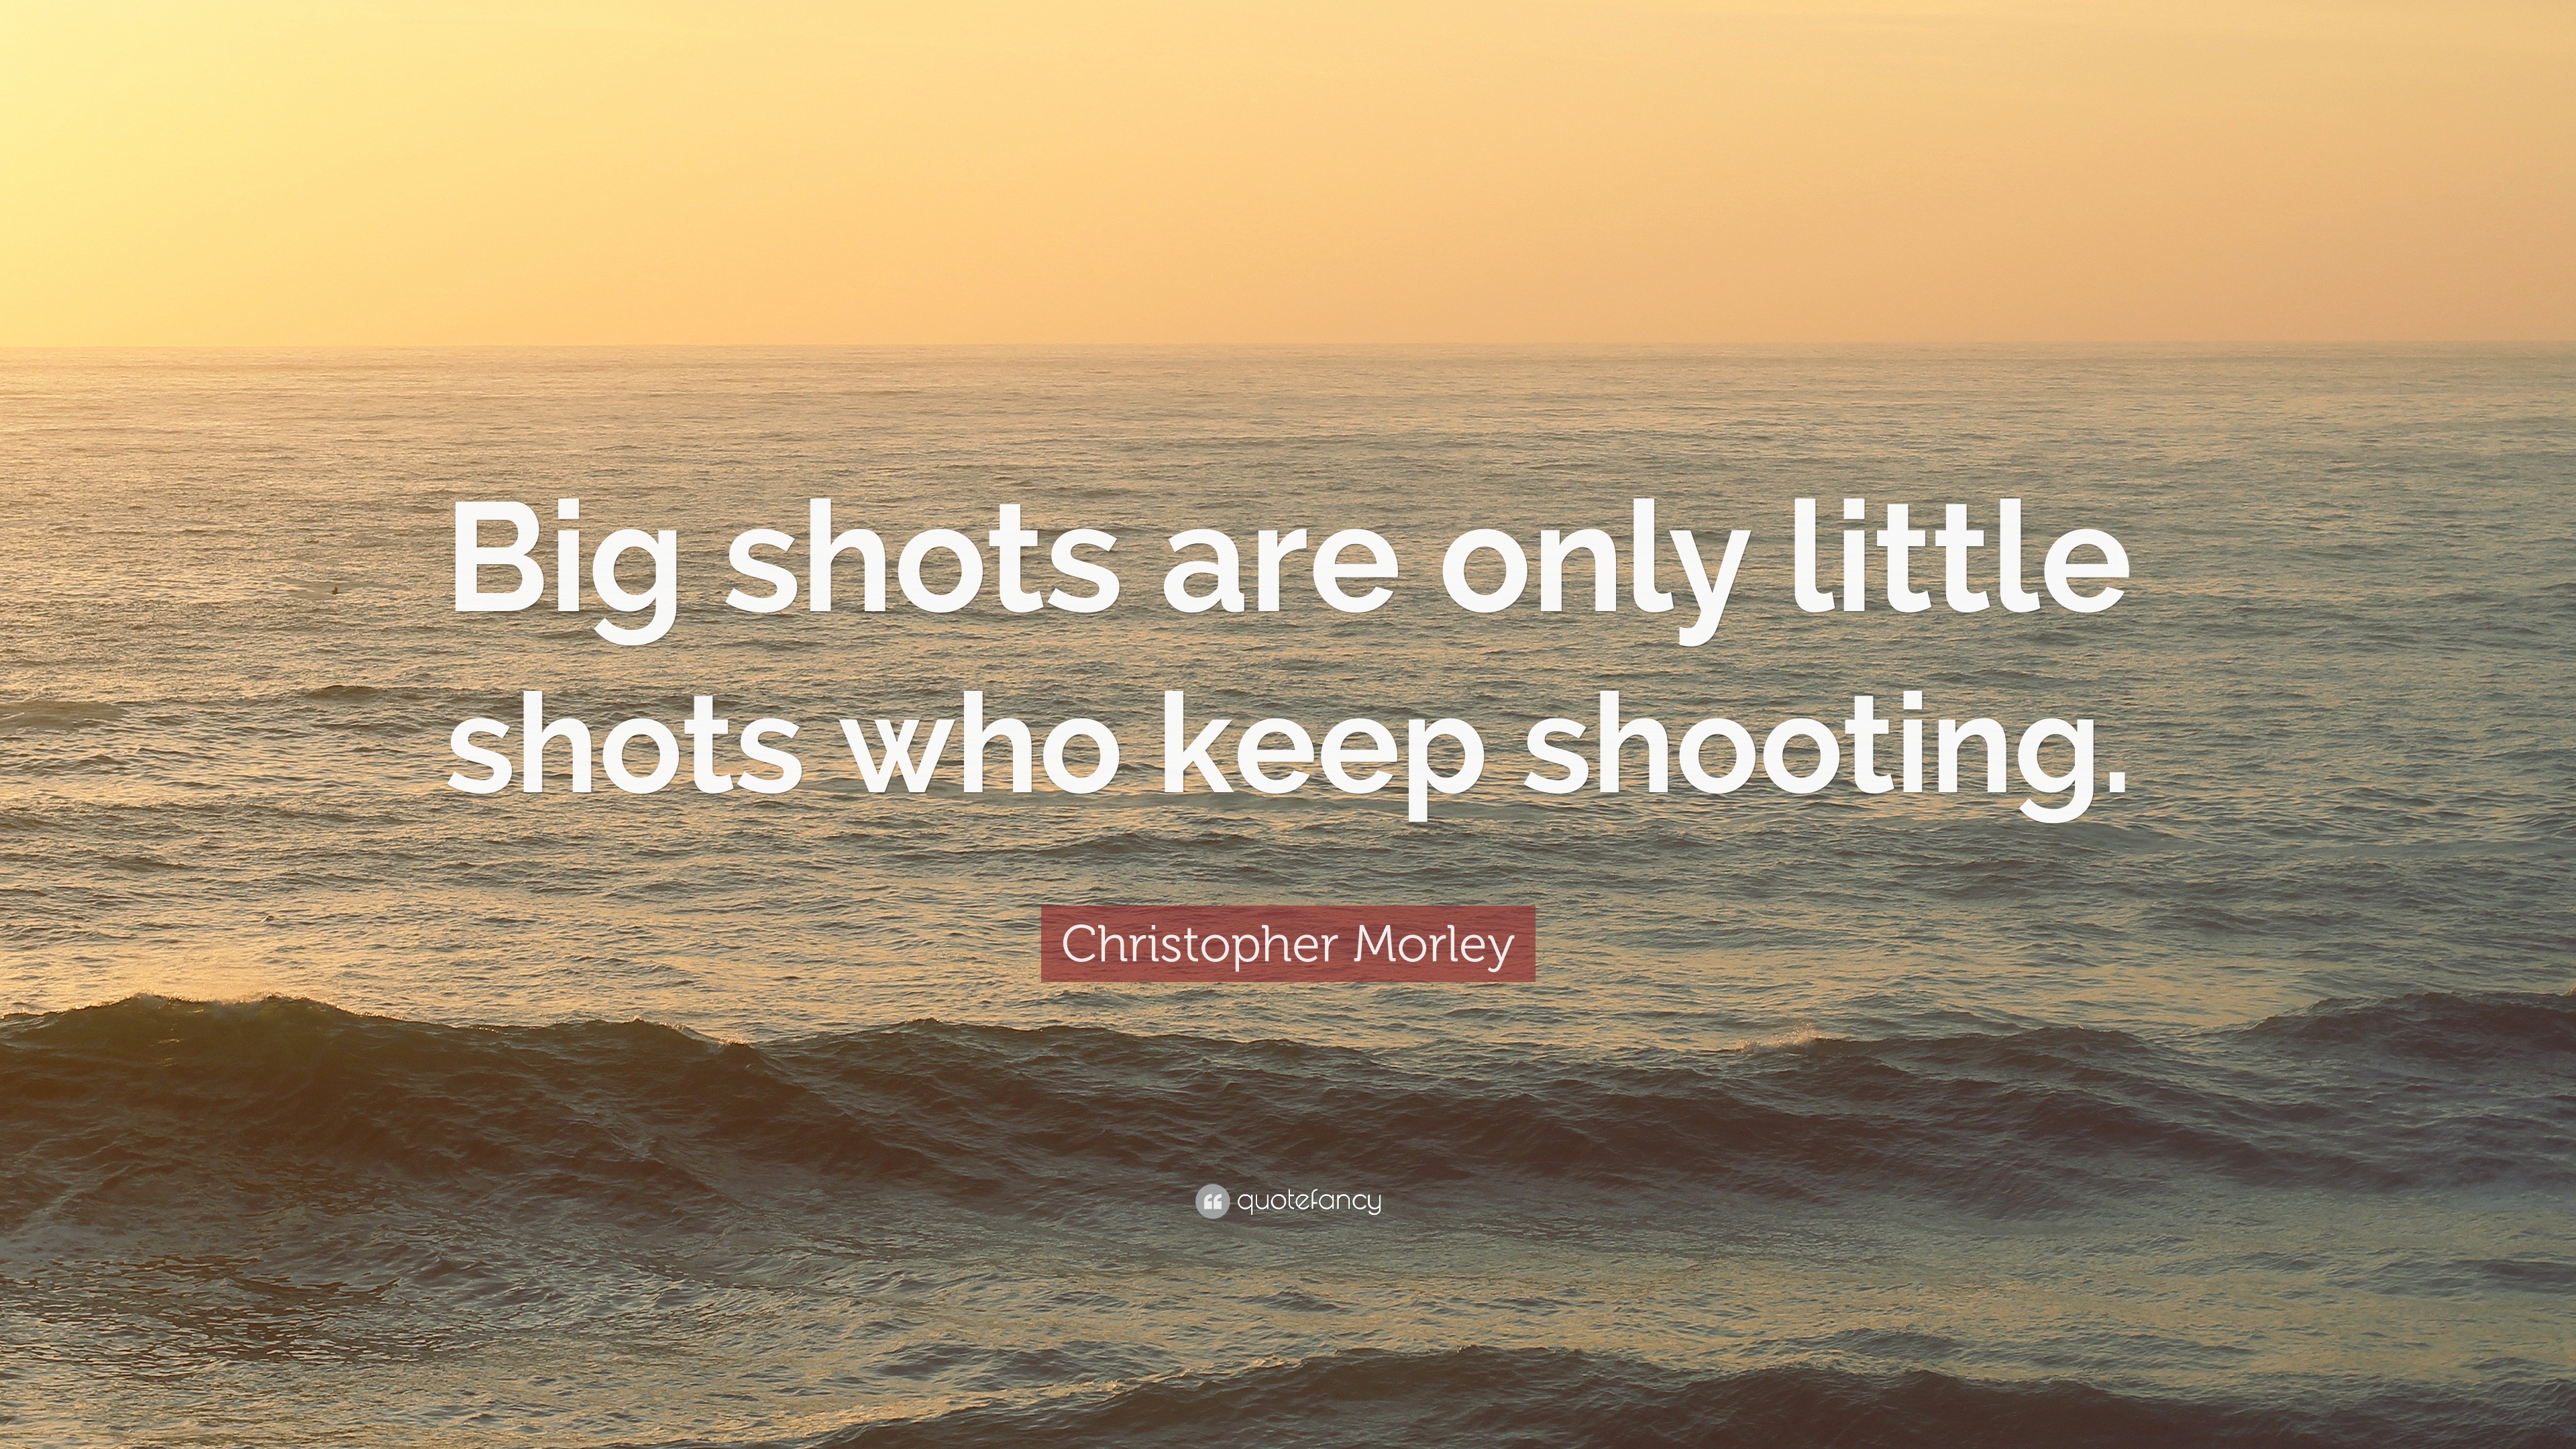 Christopher Morley Quote: “Big shots are only little shots who keep ...